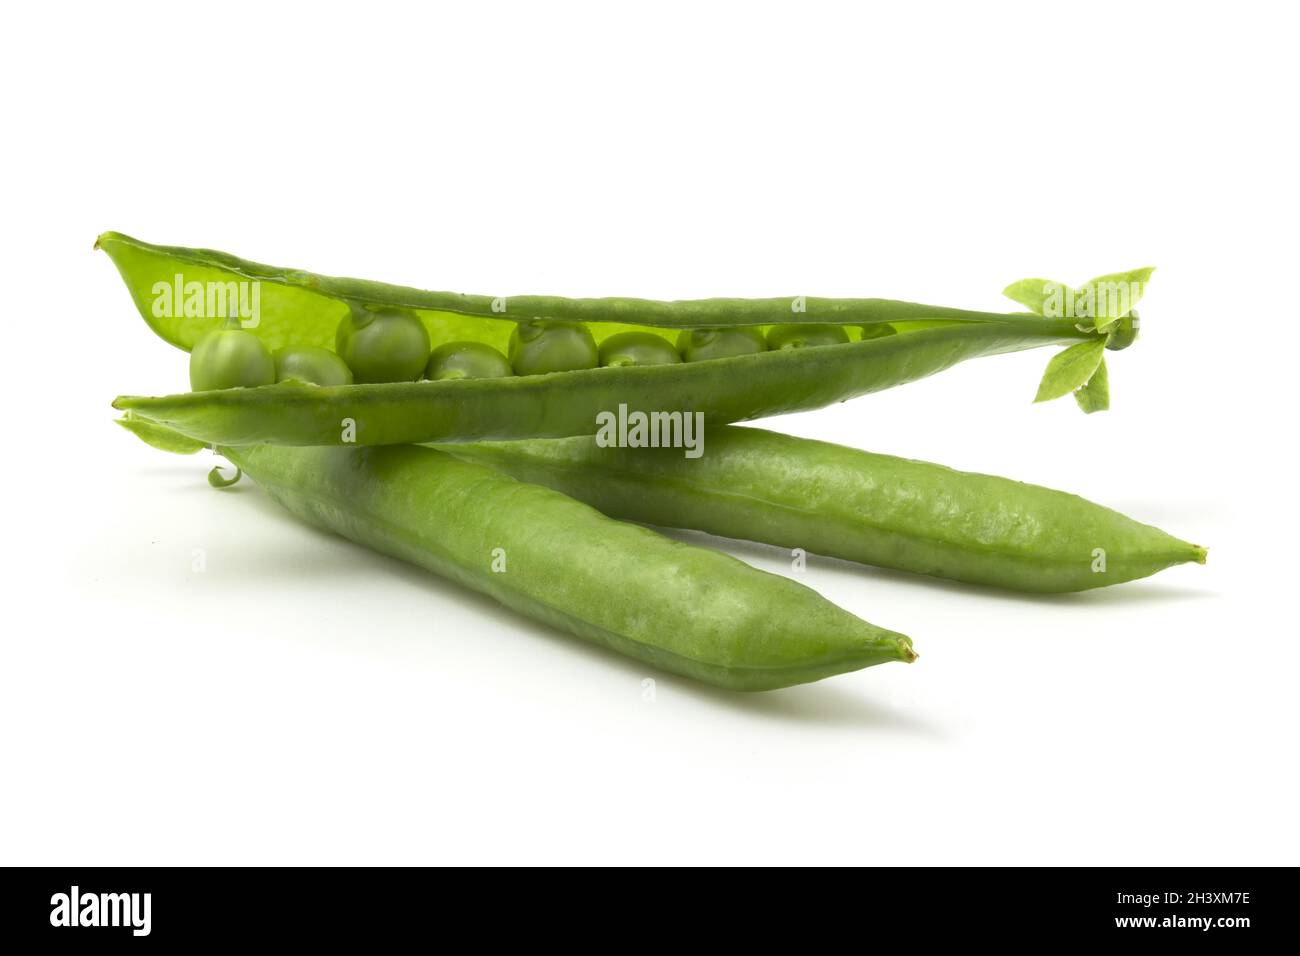 Isolated green pea pods on a white background. Beans in an open pod. Stock Photo